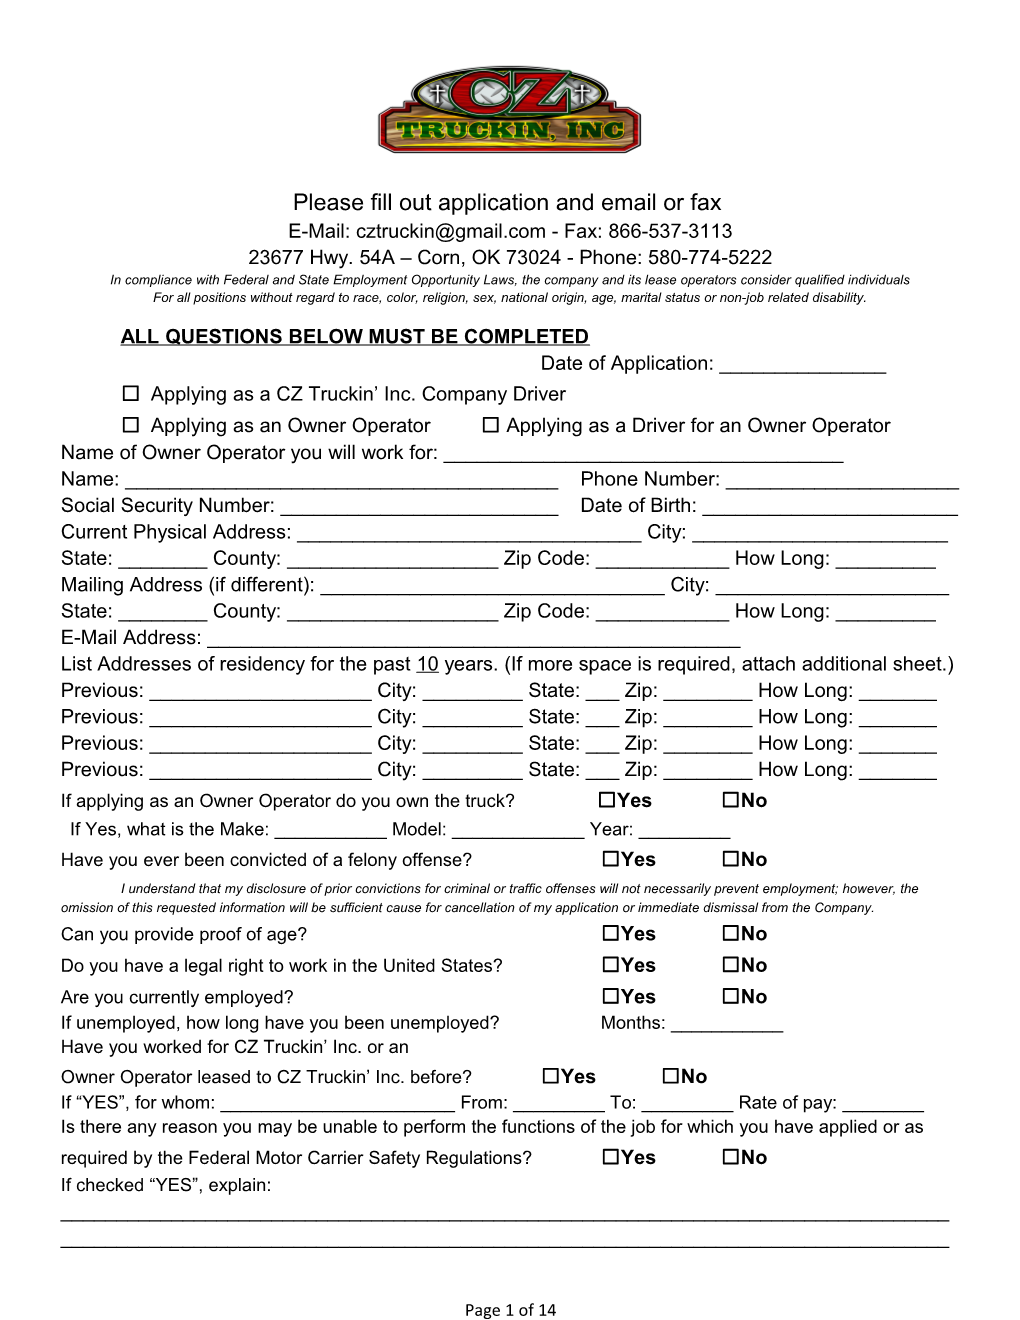 Please Fill out Application and Email Or Fax